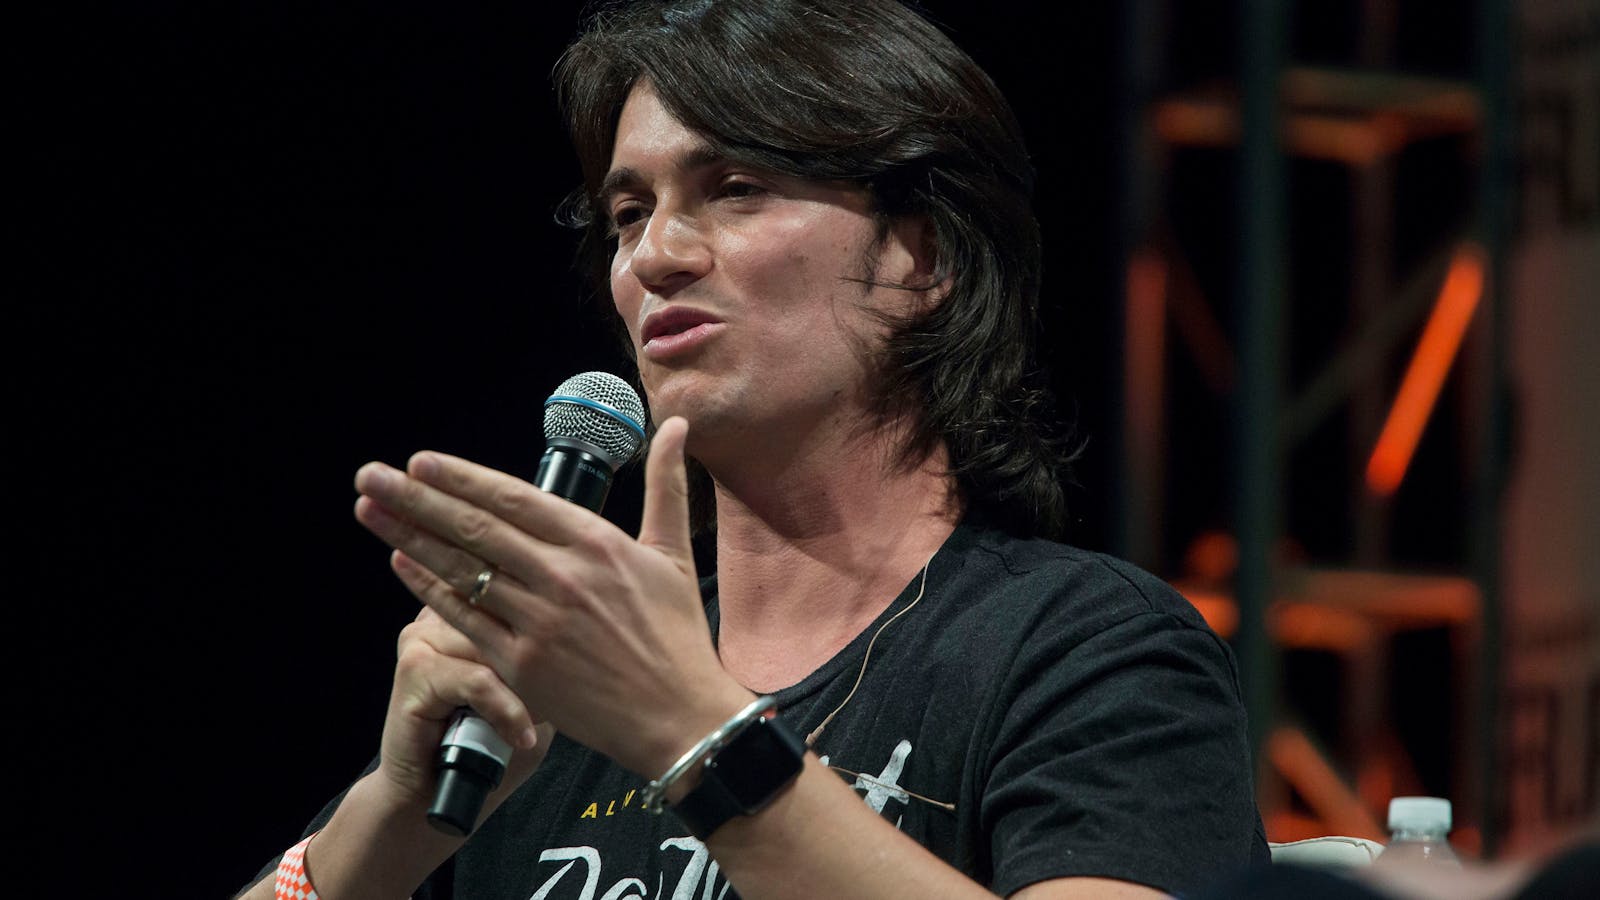 WeWork co-founder and CEO Adam Neumann. Photo by Bloomberg.